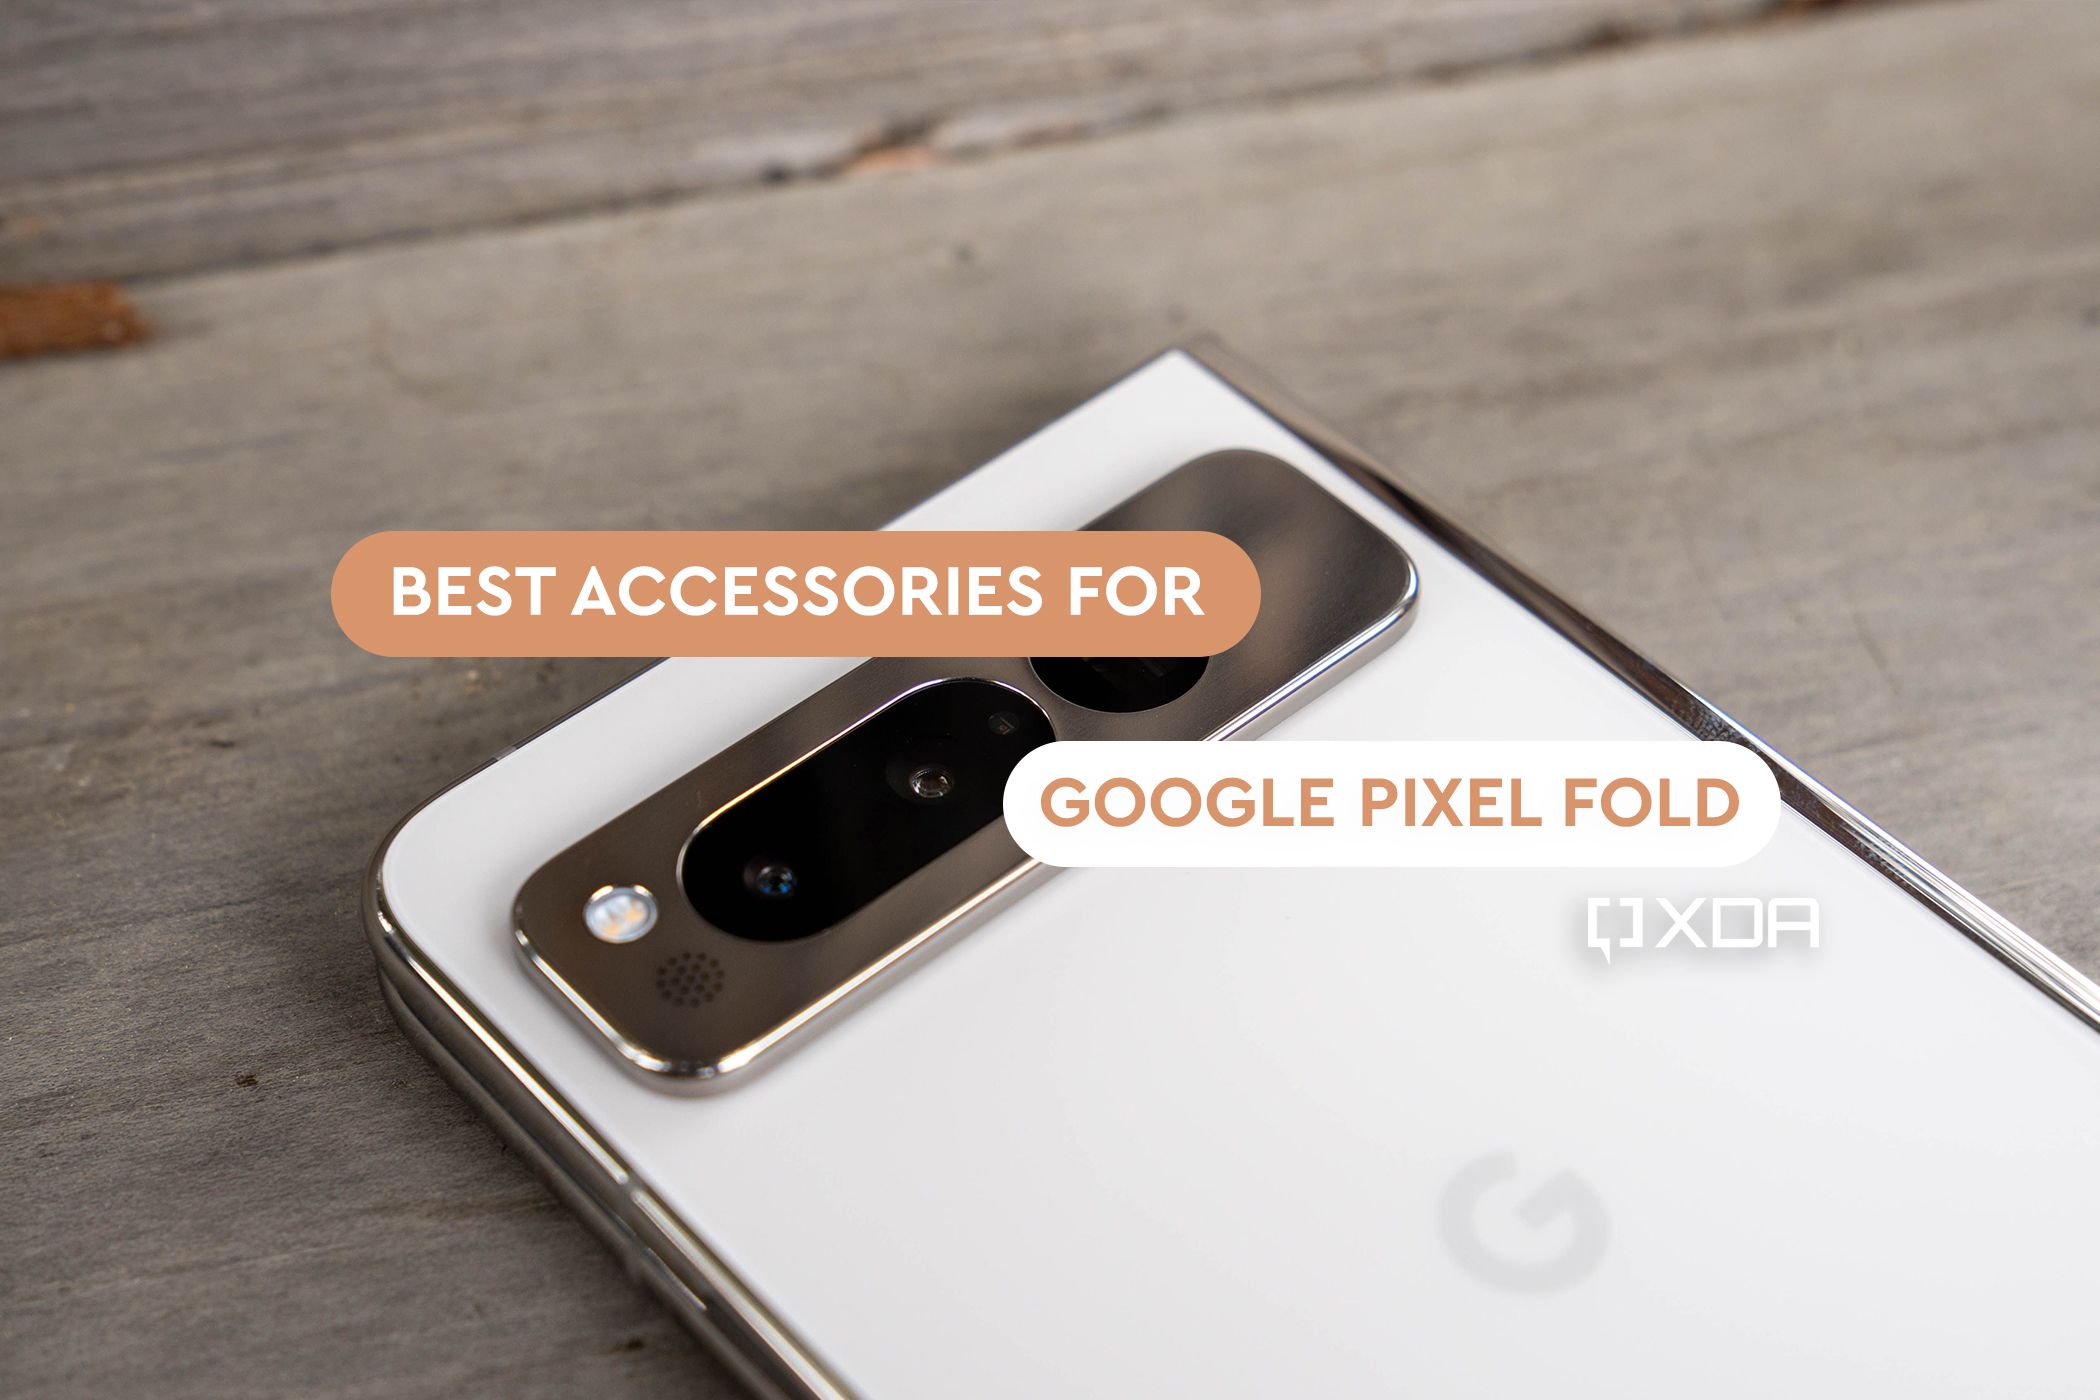 Google Pixel Fold on wooden surface with Best Accessories for Google Pixel Fold text and XDA logo in the foreground.